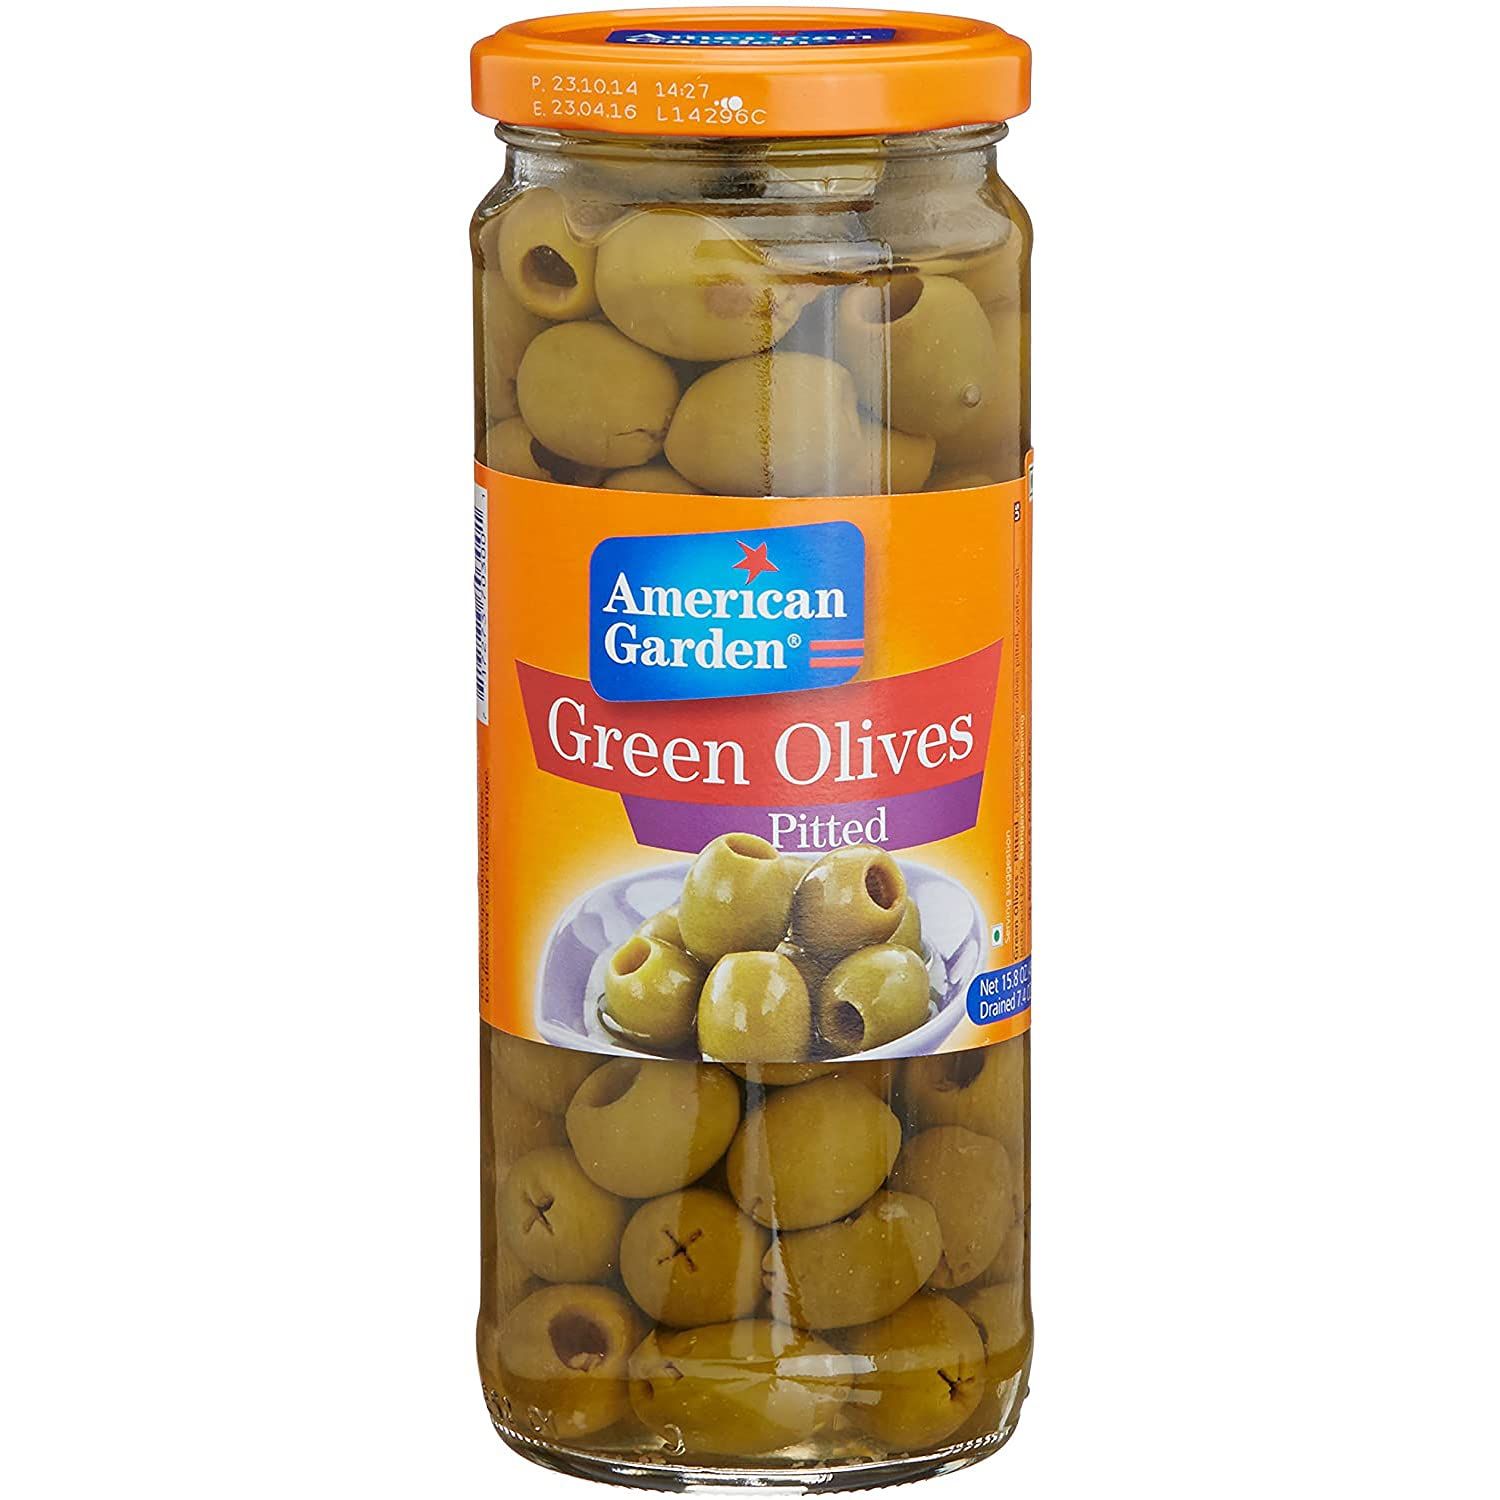 American Garden Green Olives Pitted Image